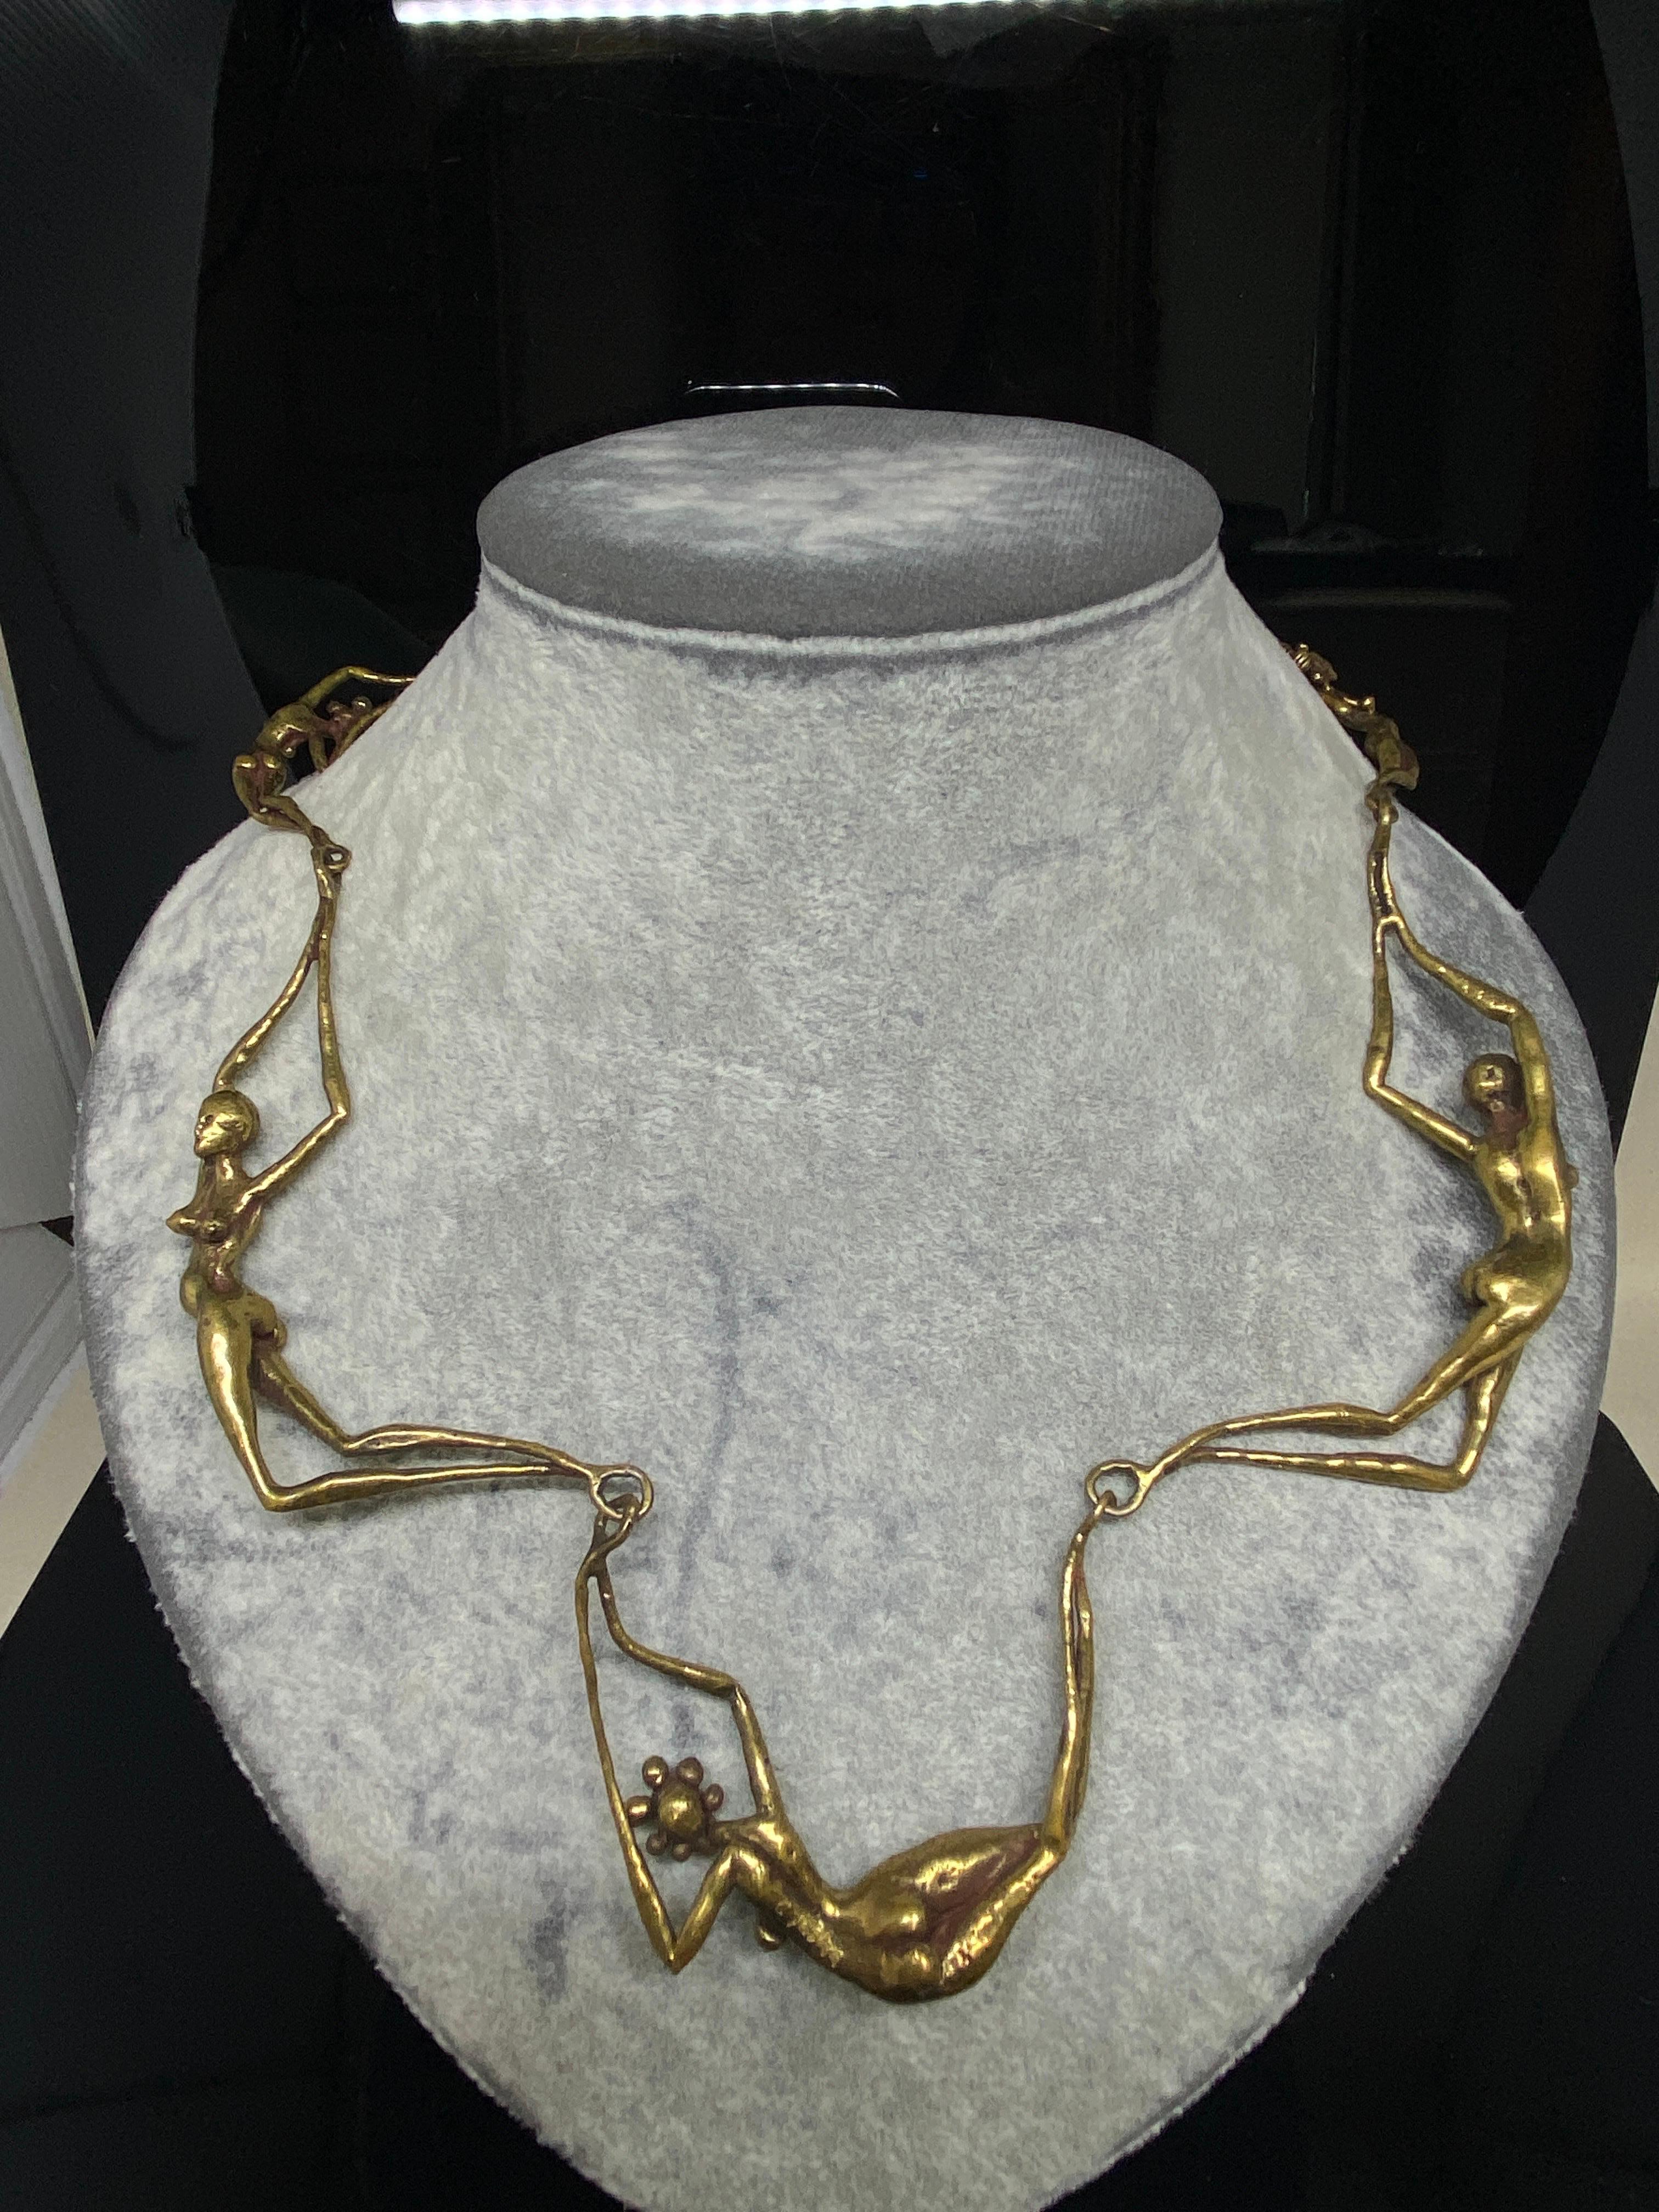 Up for your consideration is this unusual necklace by Carl Tasha. He was a well known artist from United States that was a pioneer in the Brutalist Movement in the 1960’s and ‘70’s. 

A capitavating modernist necklace comprised of surreal female